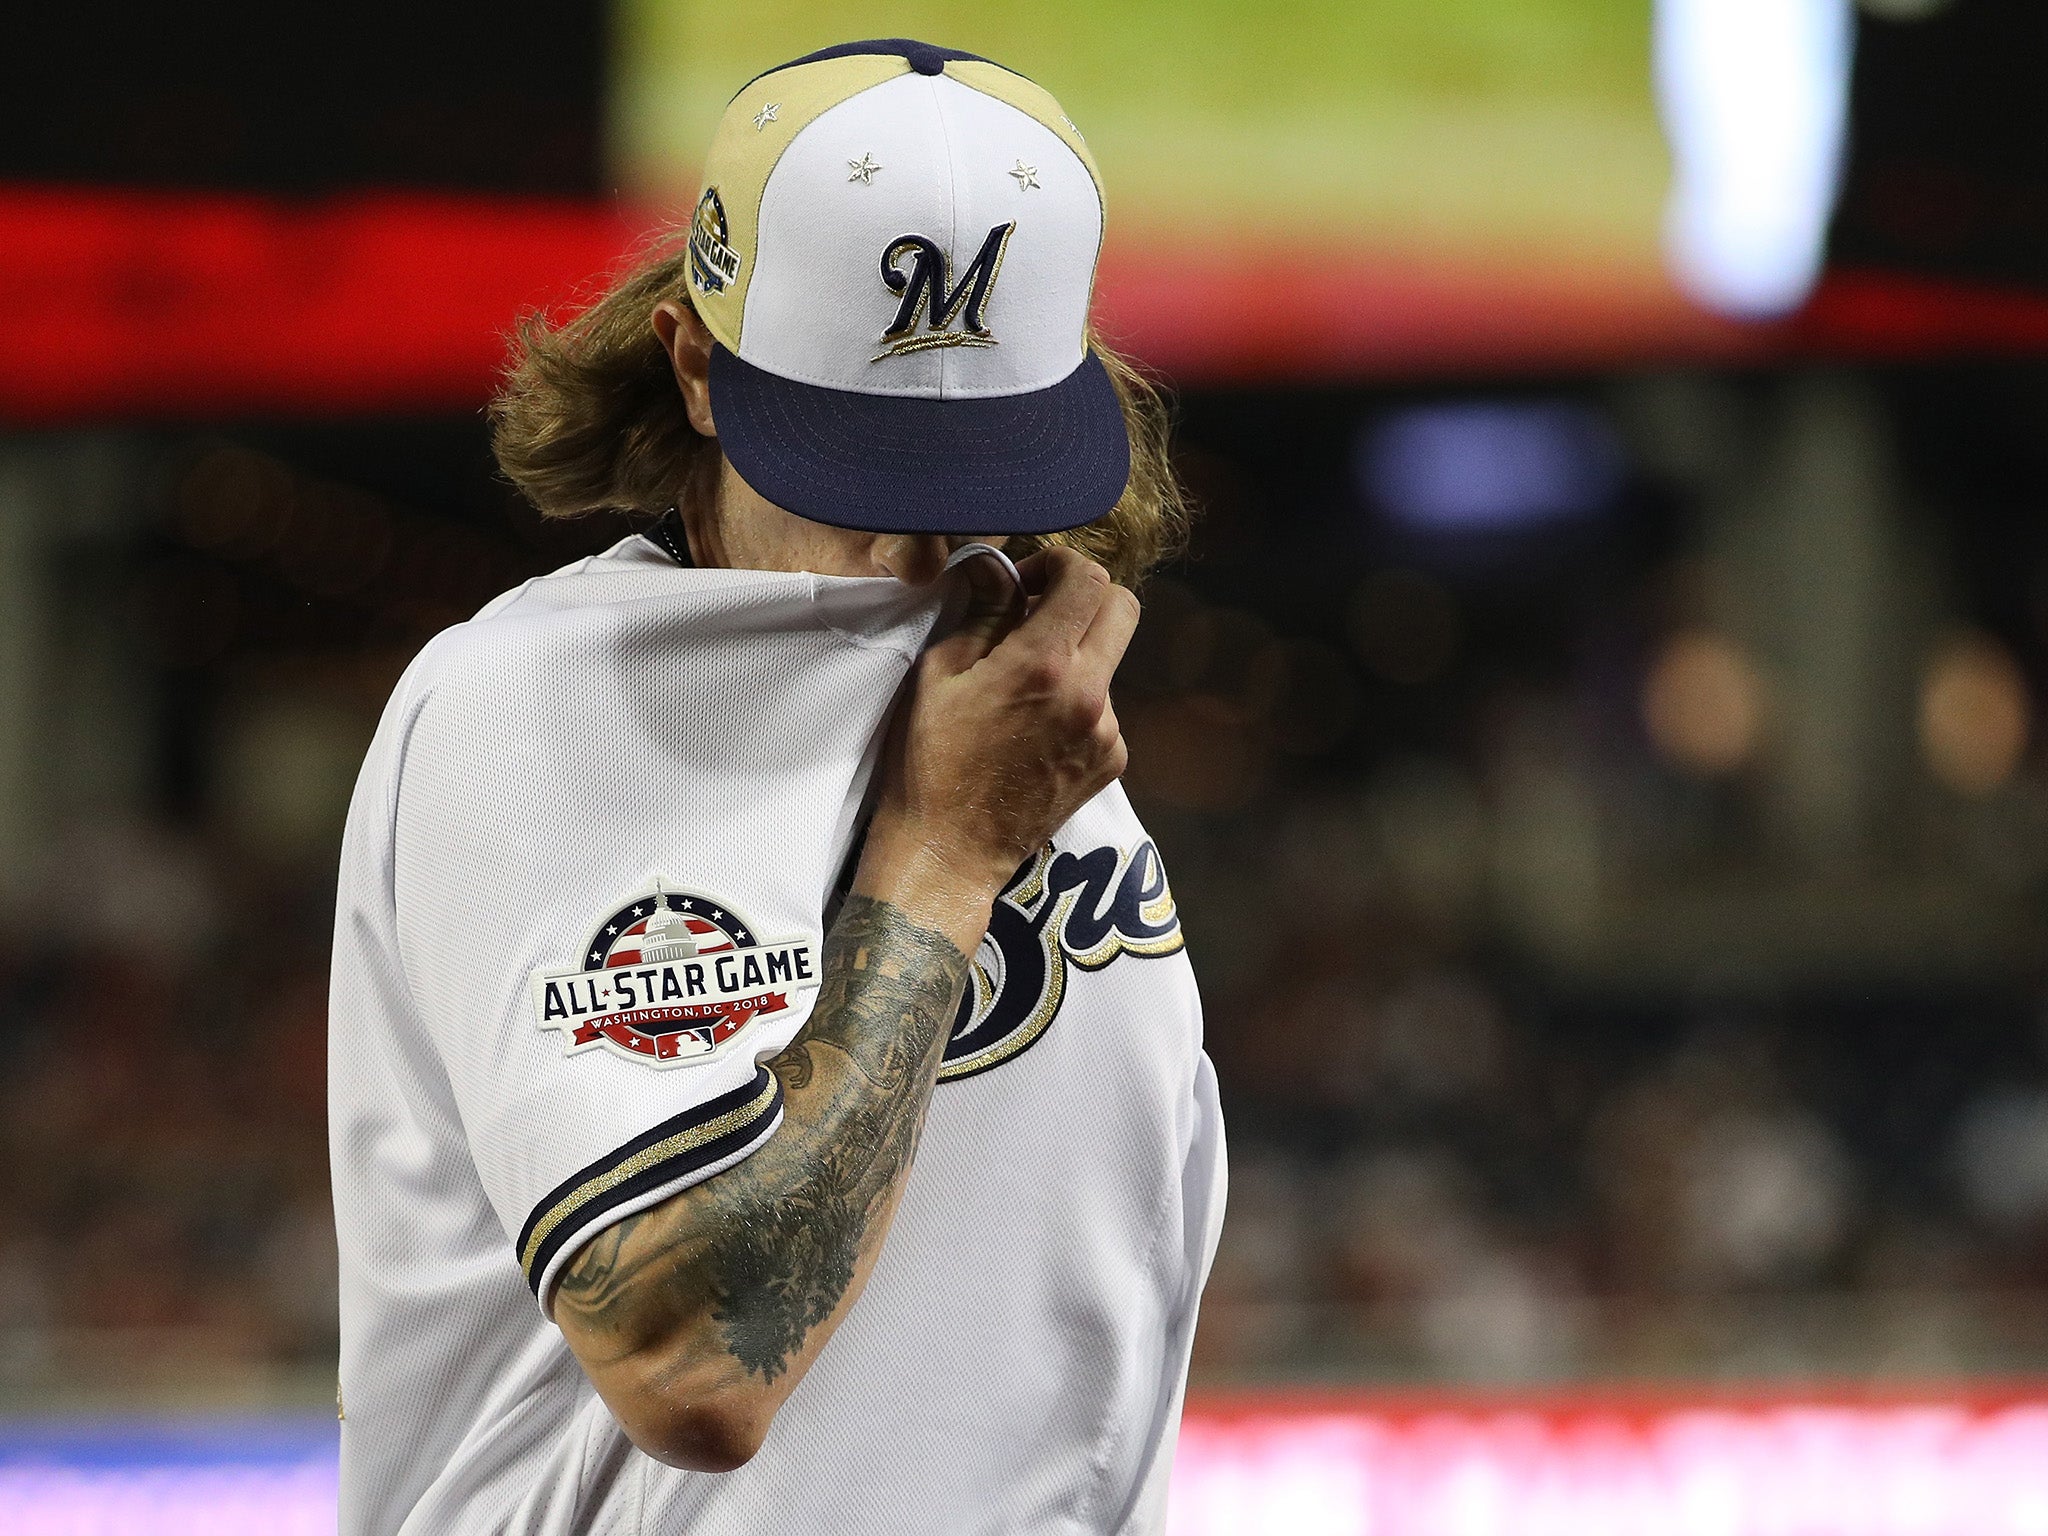 Offensive remarks made by Josh Hader, a Major League Baseball pitcher, resurfaced during MLB’s All-Star game last week